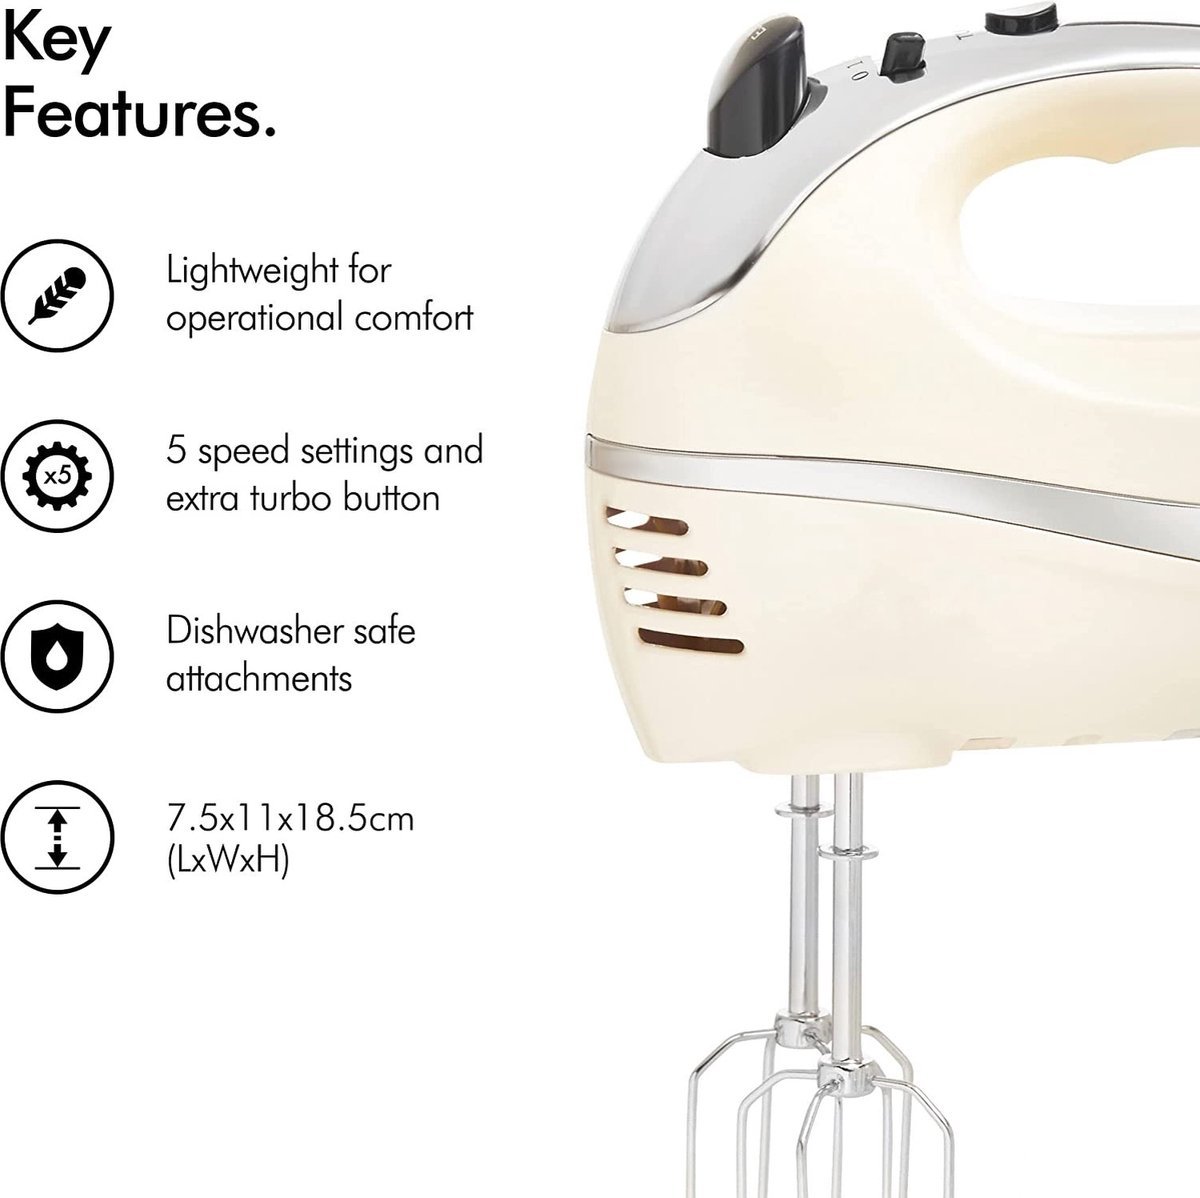 Hand Mixer – 300W – Mixer & Beaters & Whisk – Mixers – White / Purple –  Royalty Line – Nour House